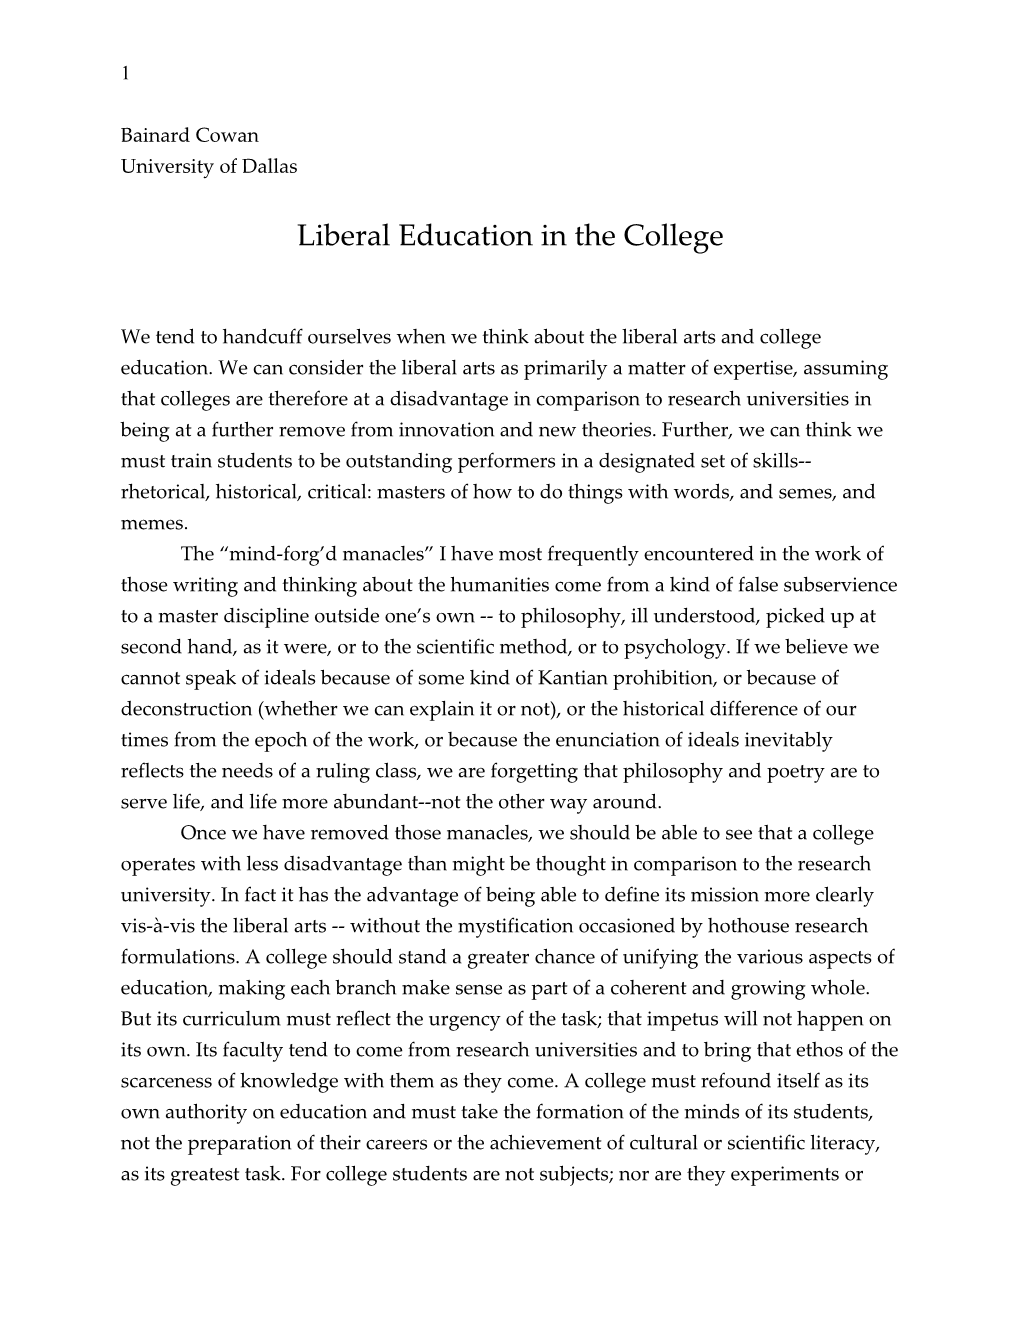 Liberal Education in the College